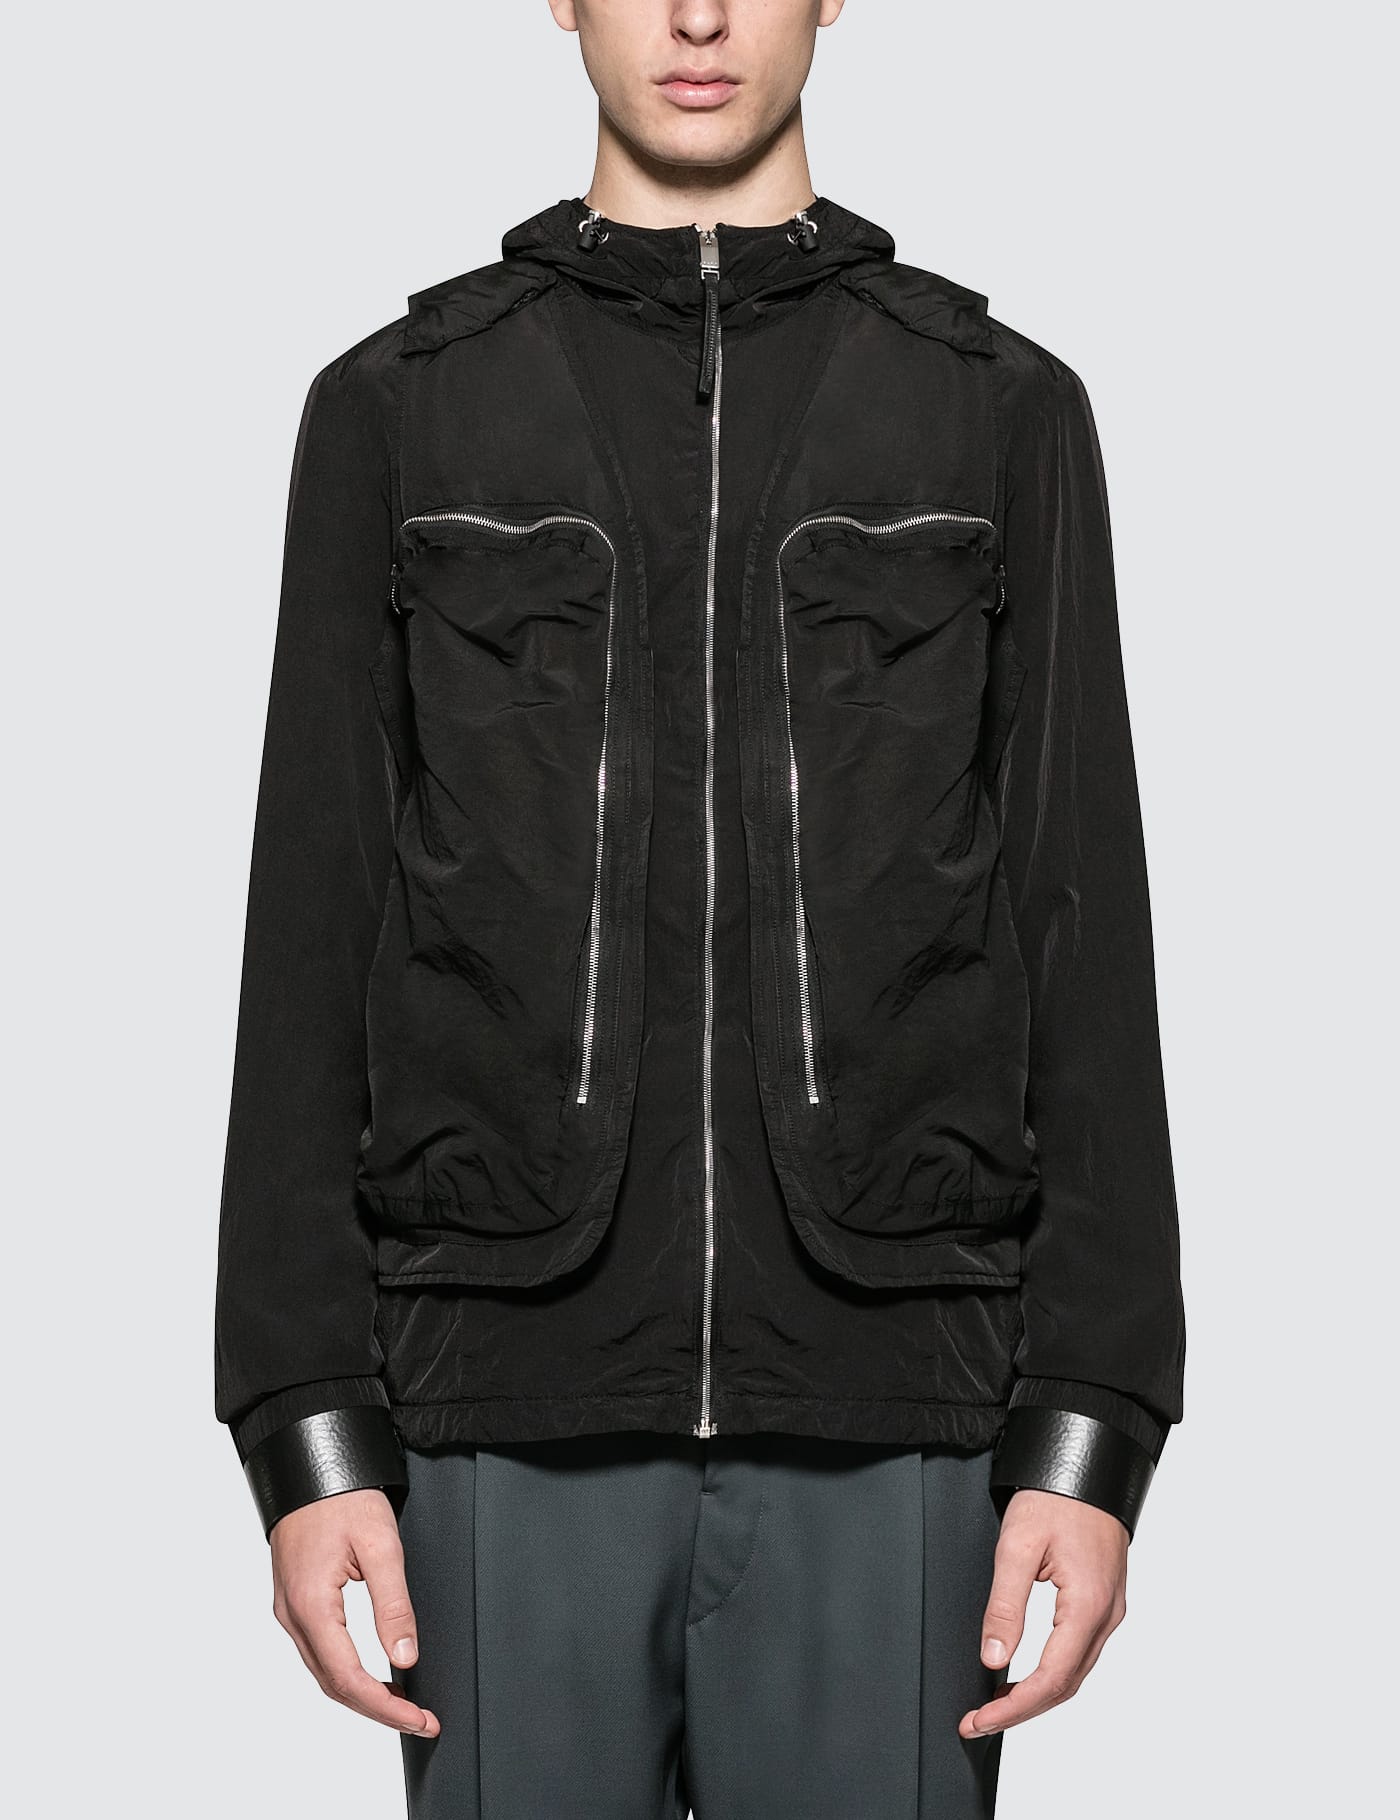 1017 ALYX 9SM - Convertible Jacket | HBX - Globally Curated 